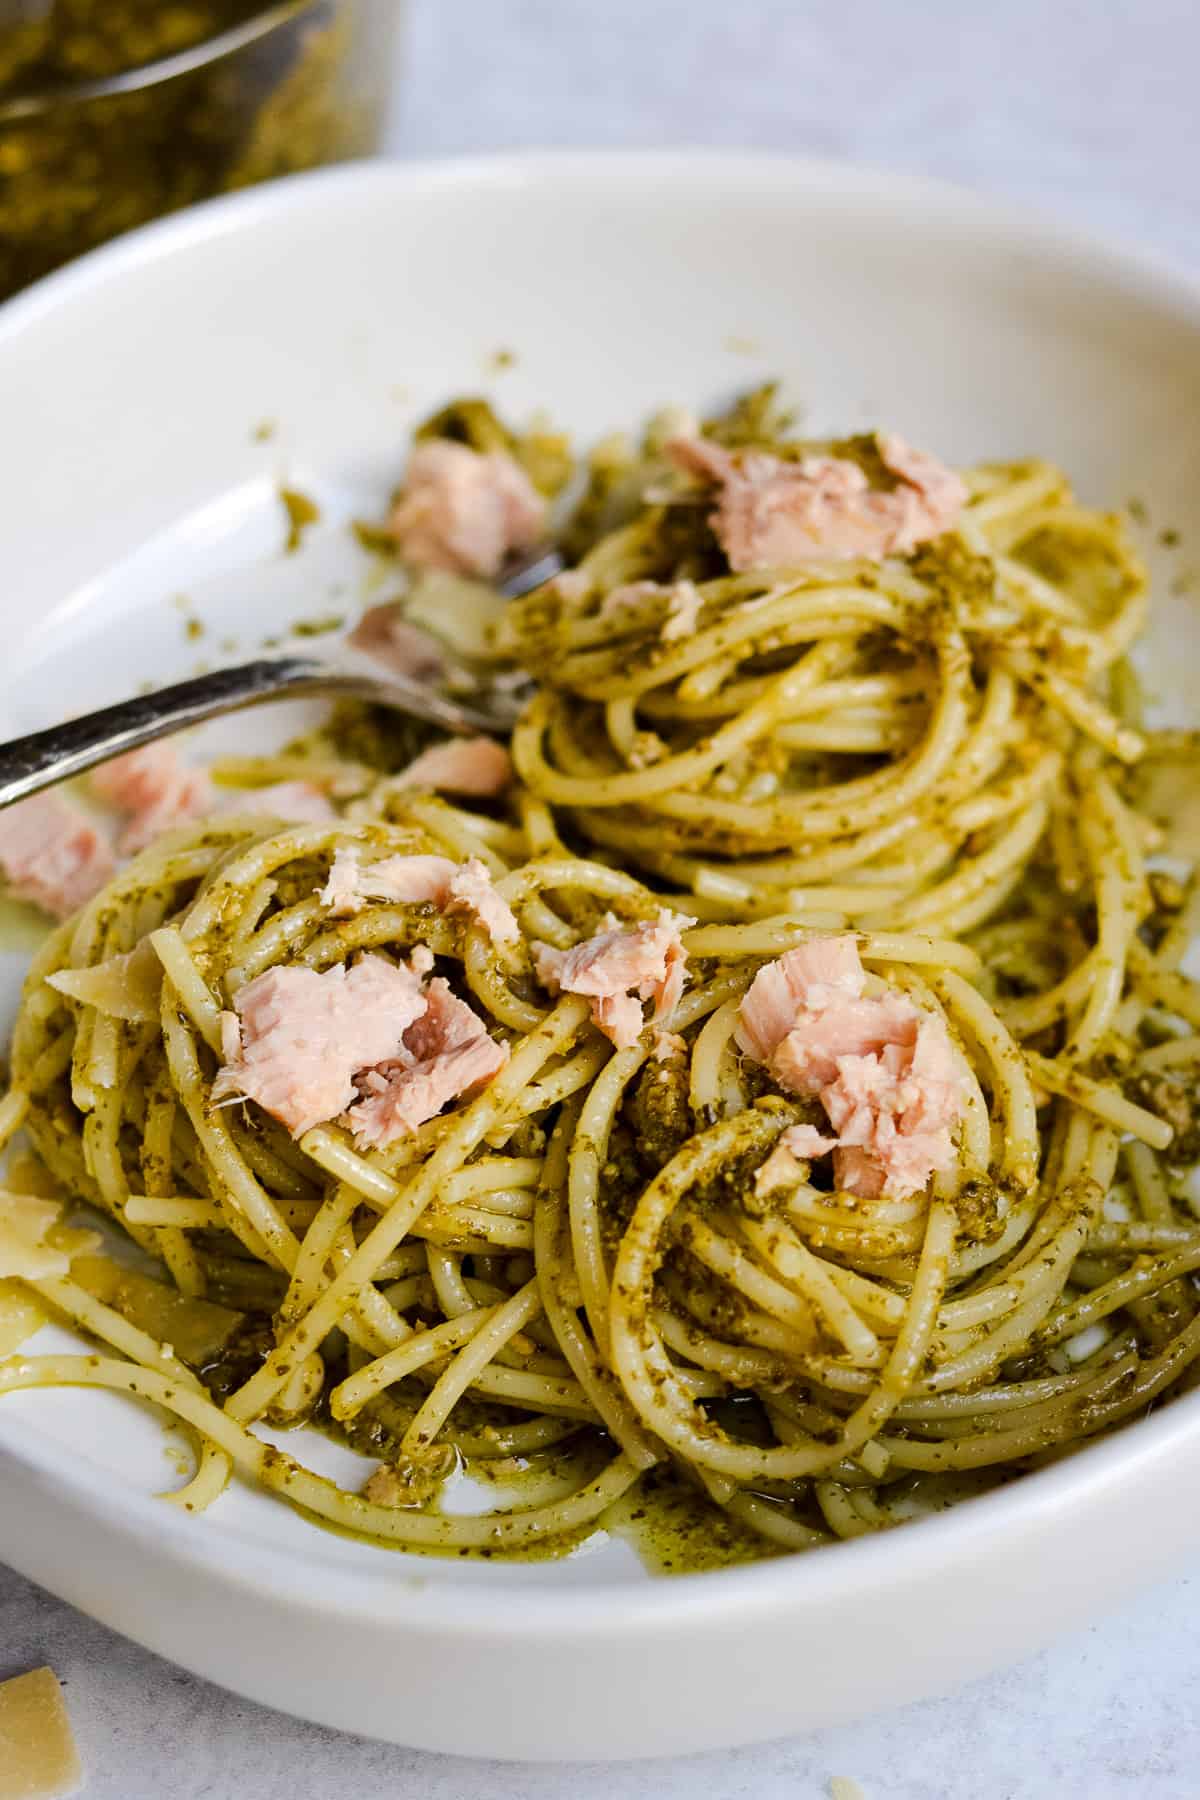 Bowl of spaghetti with pesto sauce and topped with tuna flakes.